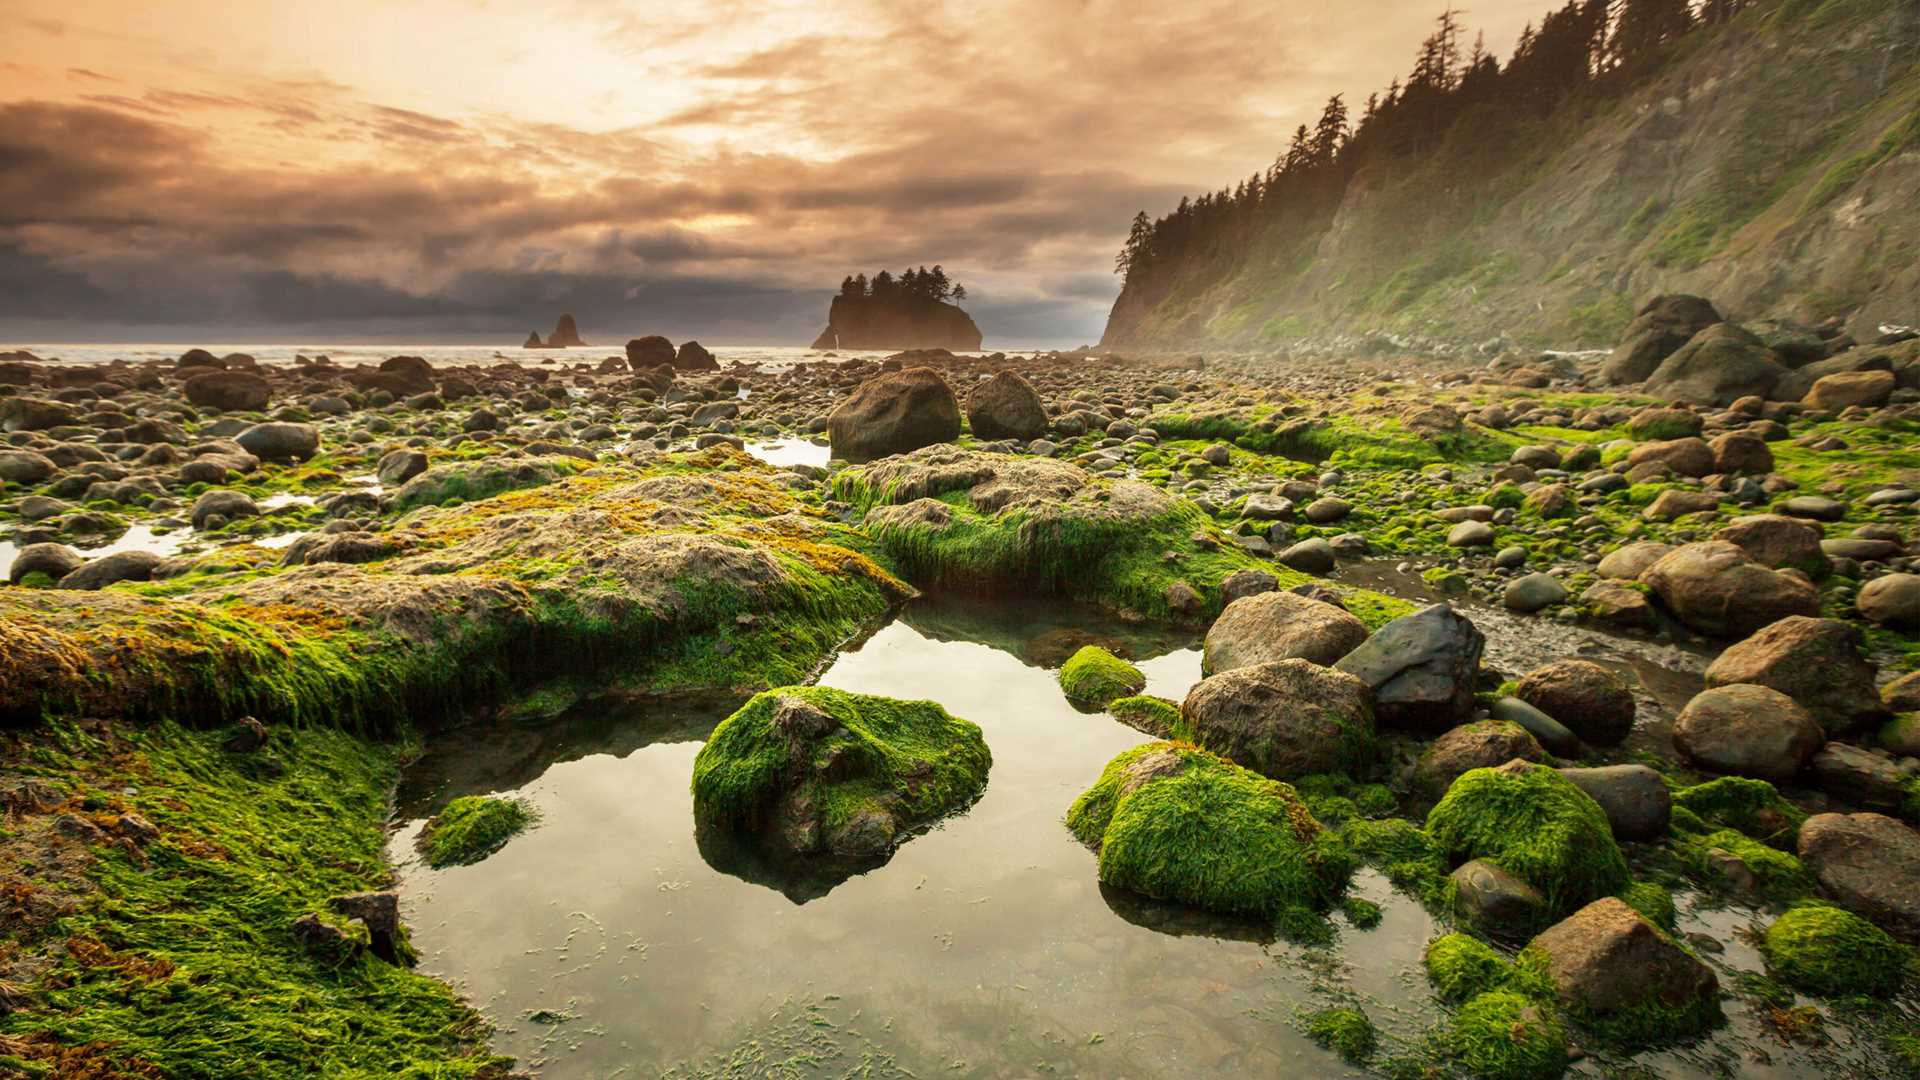 coastal landscape - rocks and moss with an island in the background